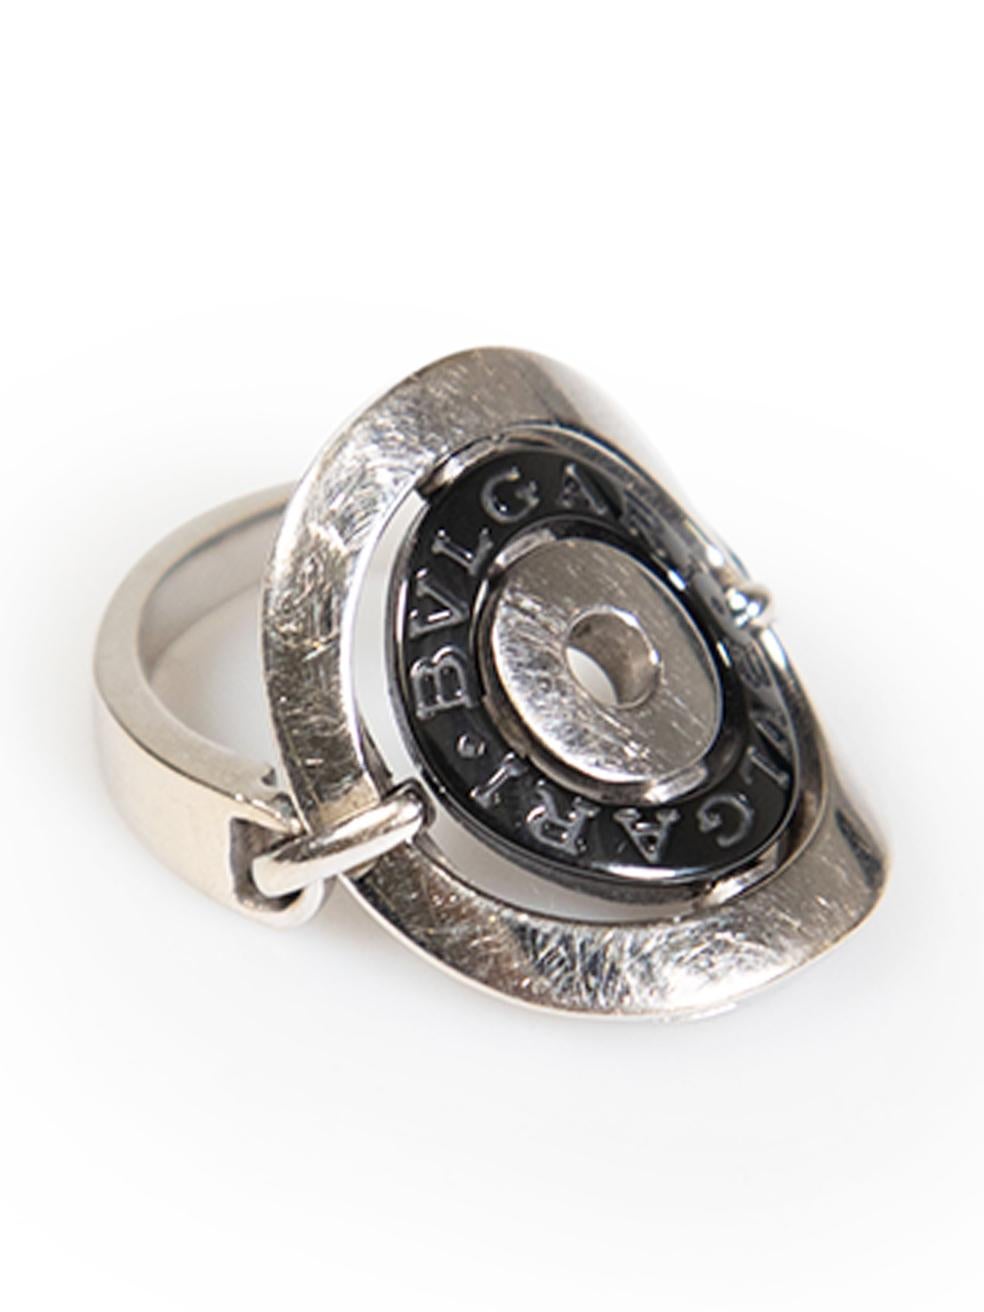 CONDITION is Very good. Minimal wear to ring is evident. Minimal wear to the hardware with light scratches on this used Bvlgari designer resale item.
 
Details
Model: Astrale Cerki
Silver
18K White Gold
Ring
Black ceramic logo detail
Swivel band
